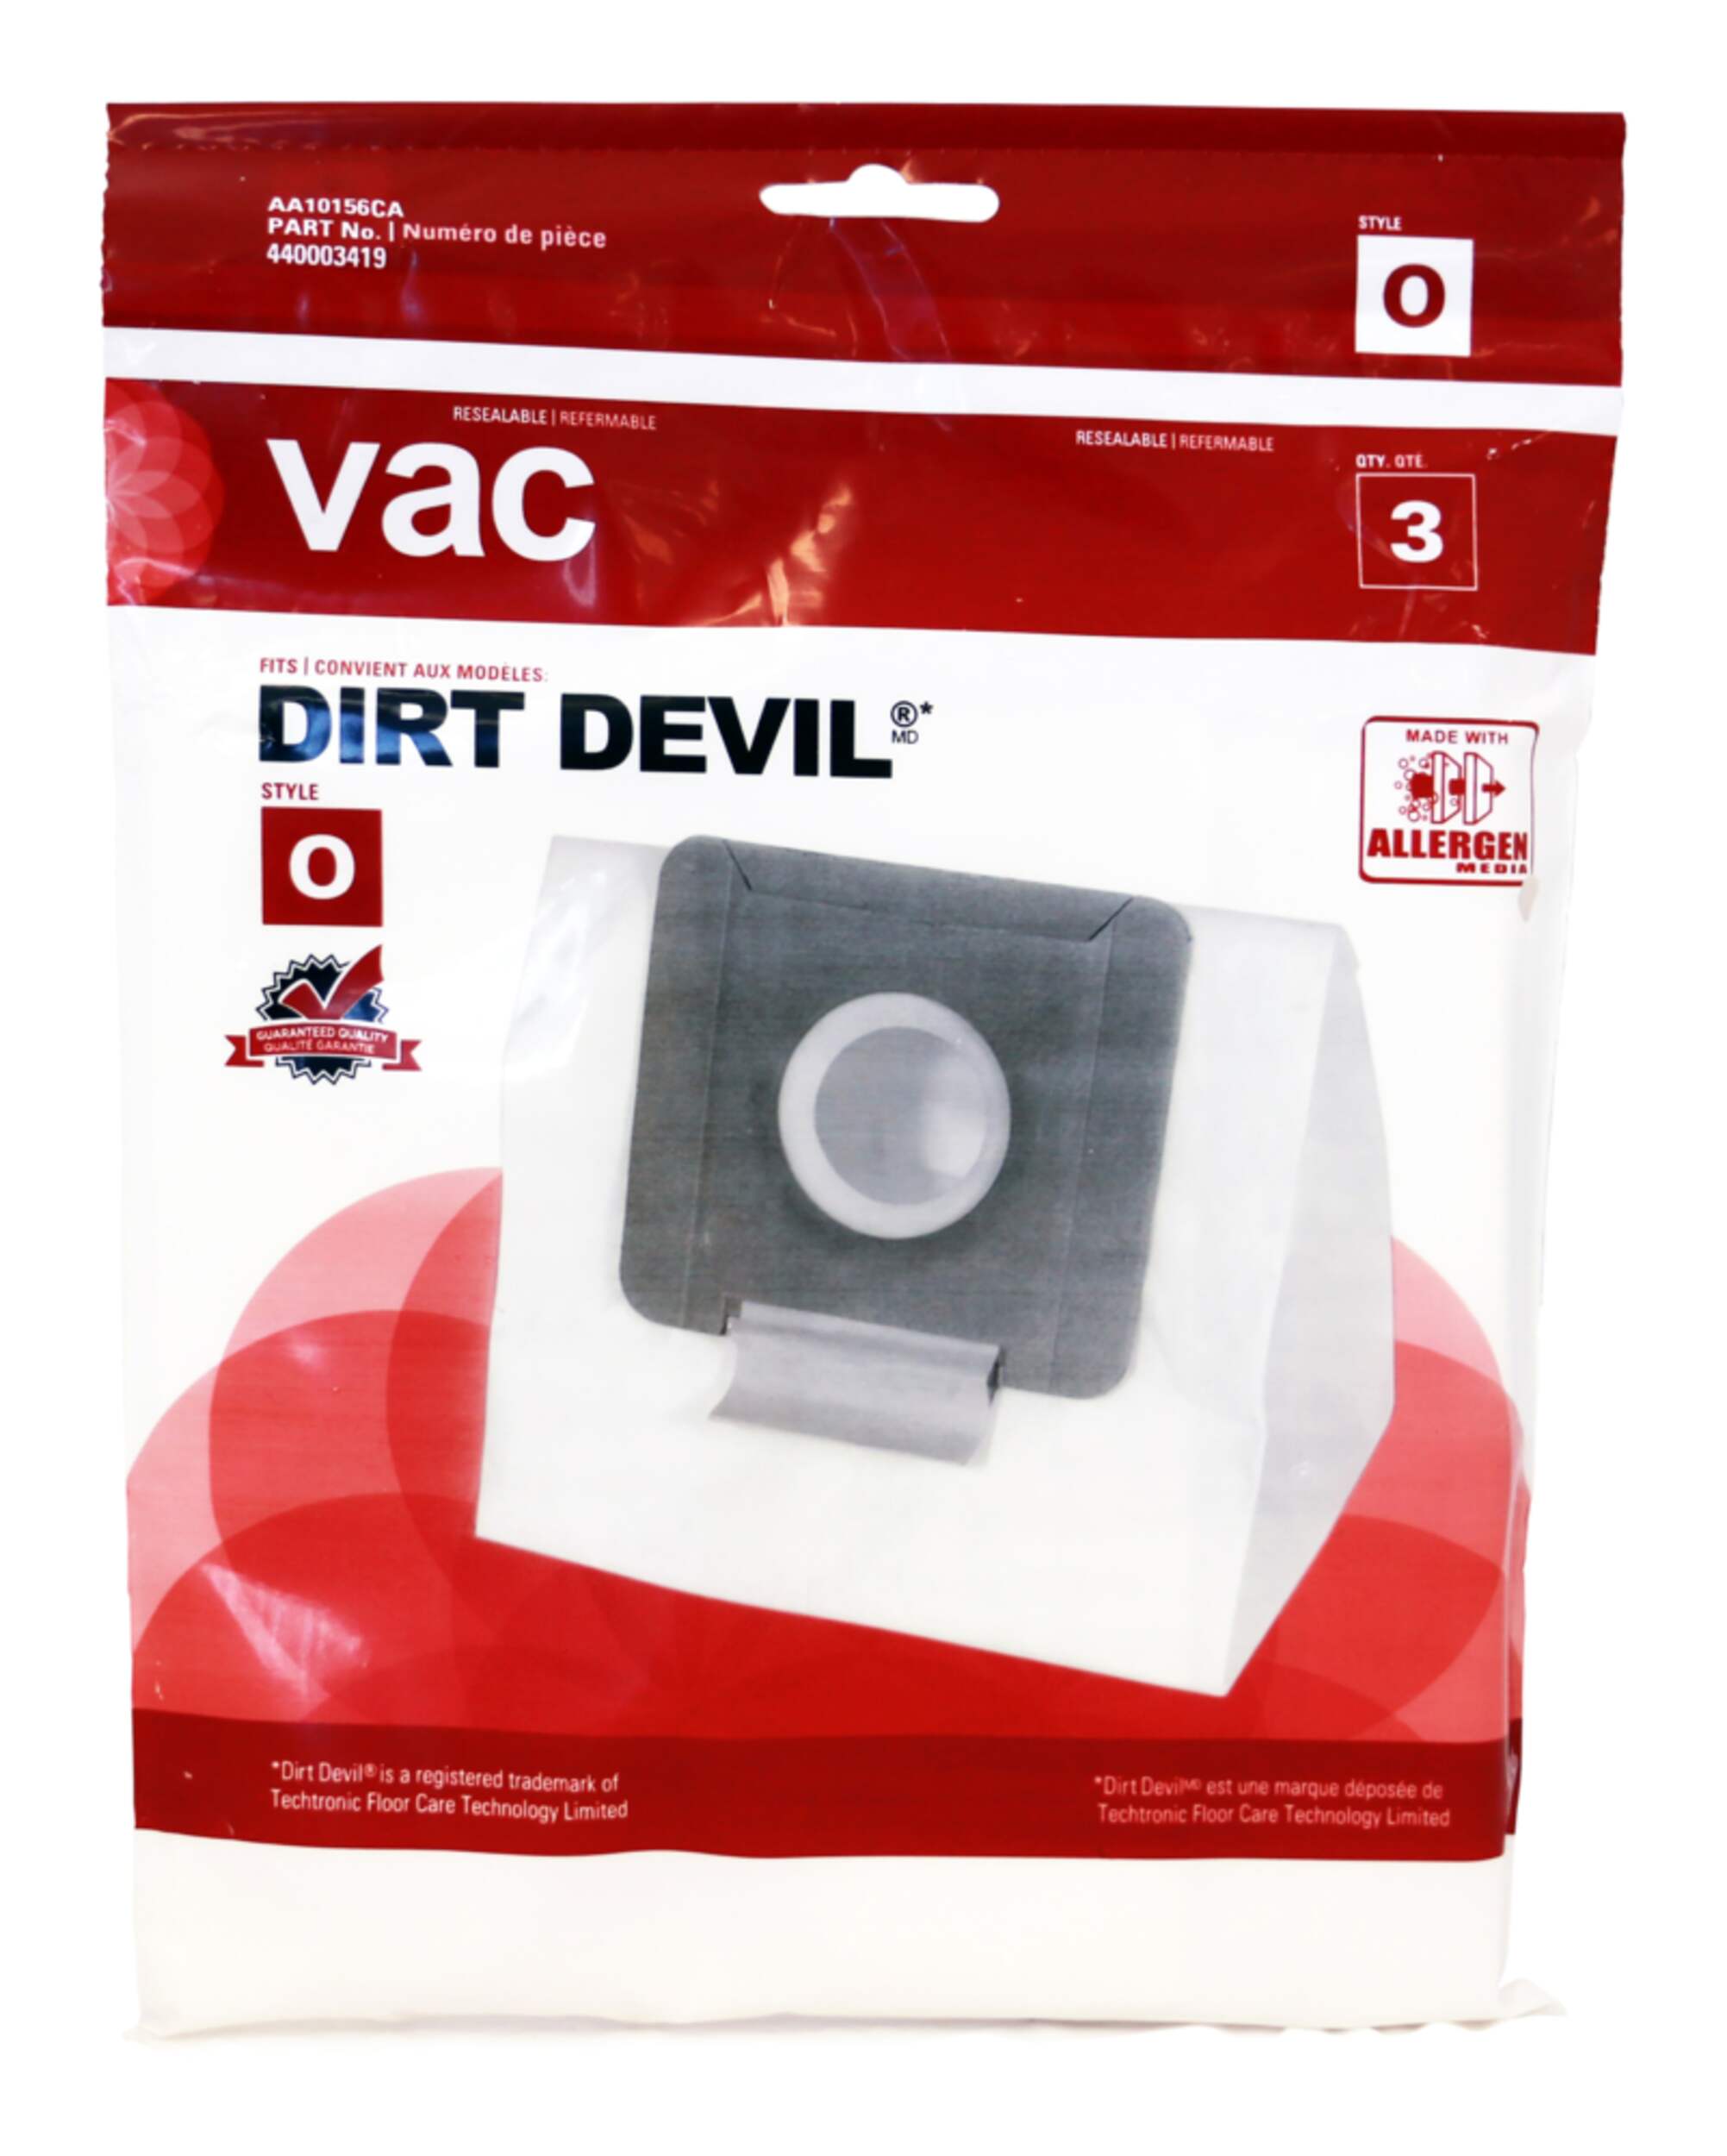 VAC Dirt Devil Type O Replacement Allergen Vacuum Cleaner Bags (3-pack)